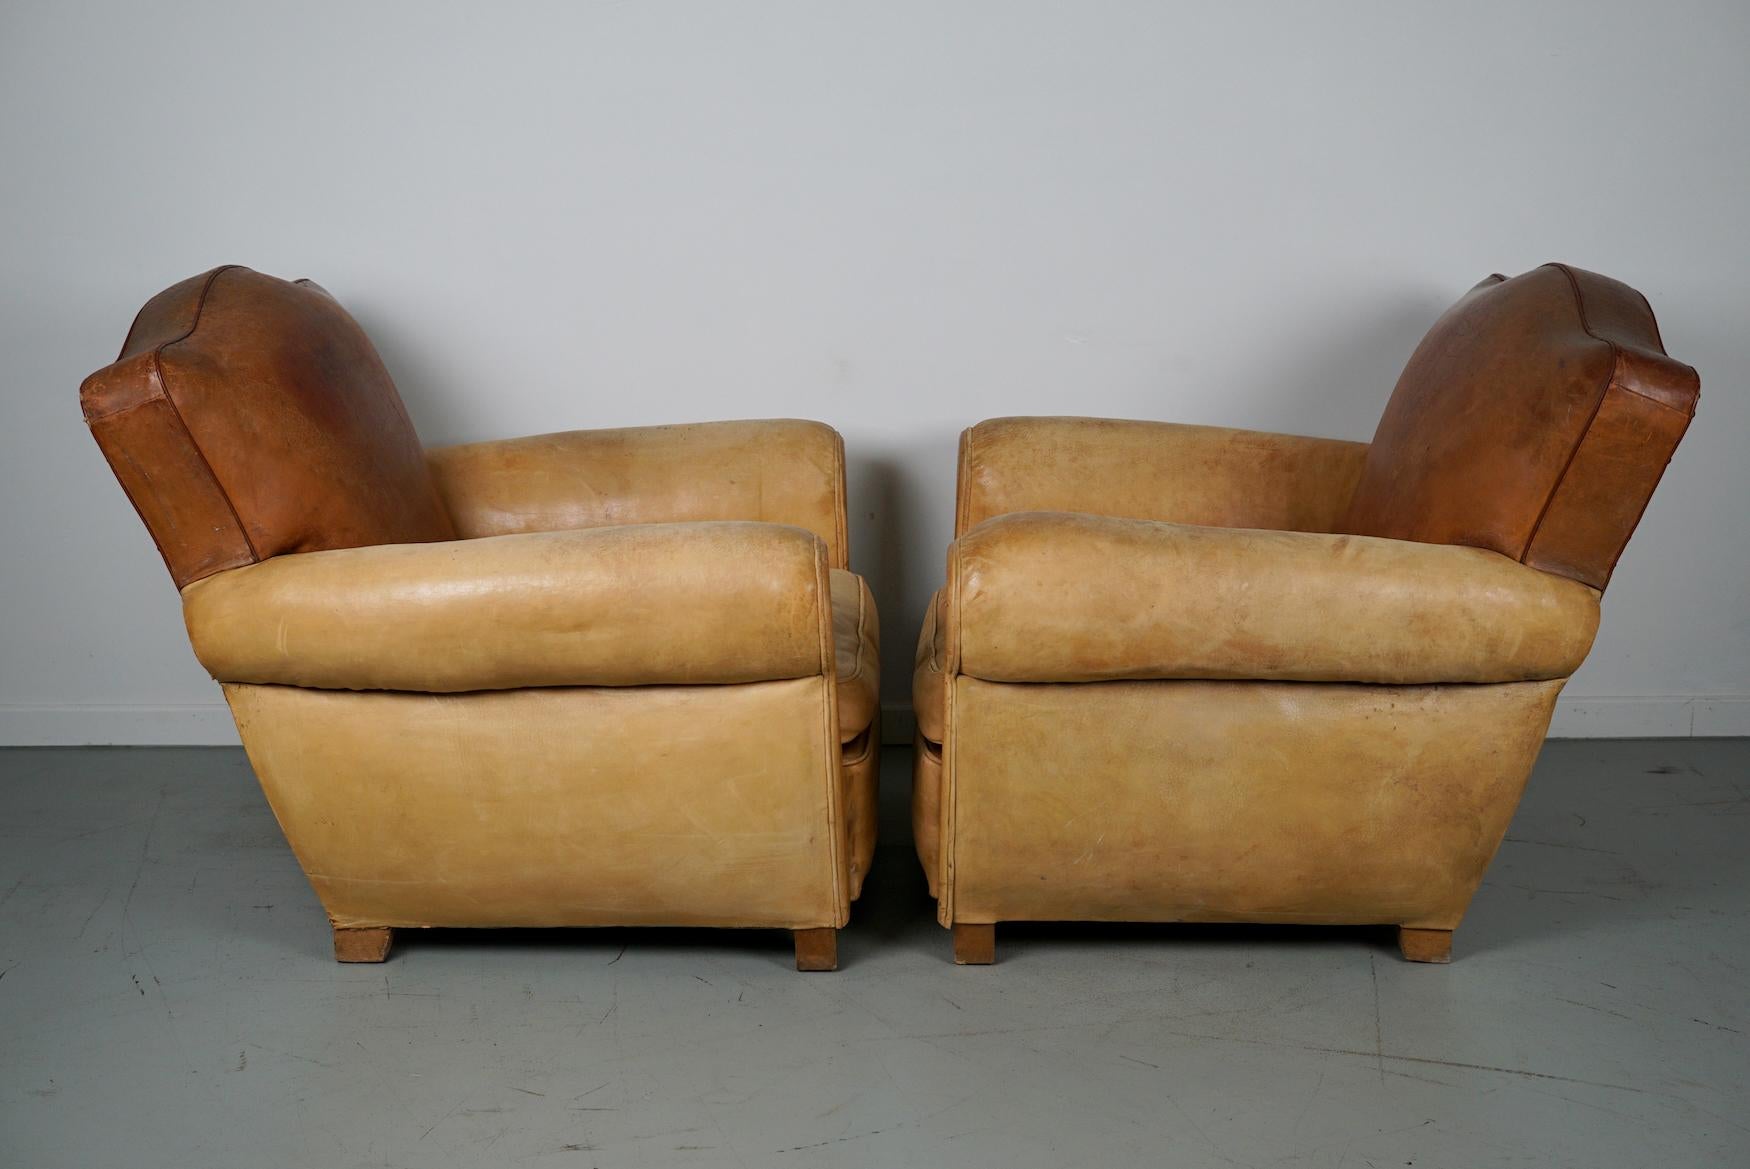  Pair of French Cognac Moustache Back Leather Club Chairs, 1940s For Sale 14